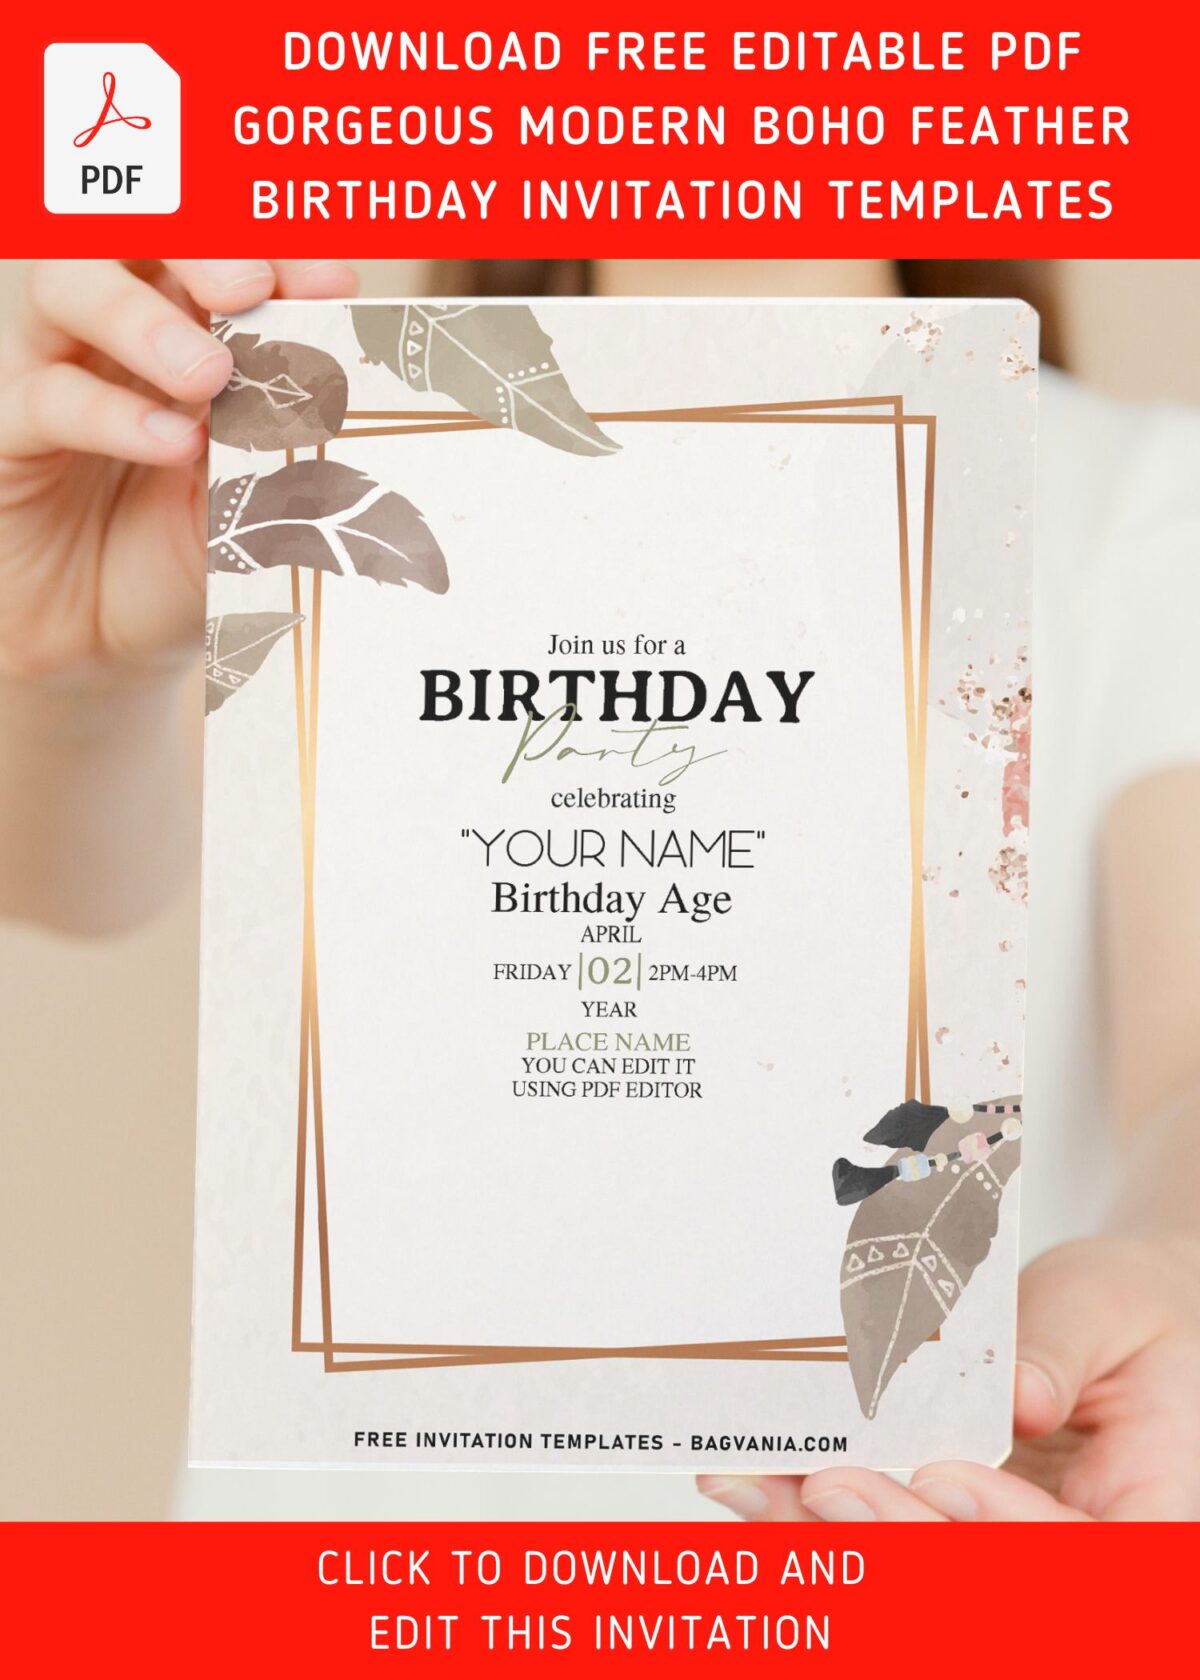 (Free Editable PDF) Gorgeous Modern Boho Feather Invitation Templates with aesthetic Bohemian feather and greenery